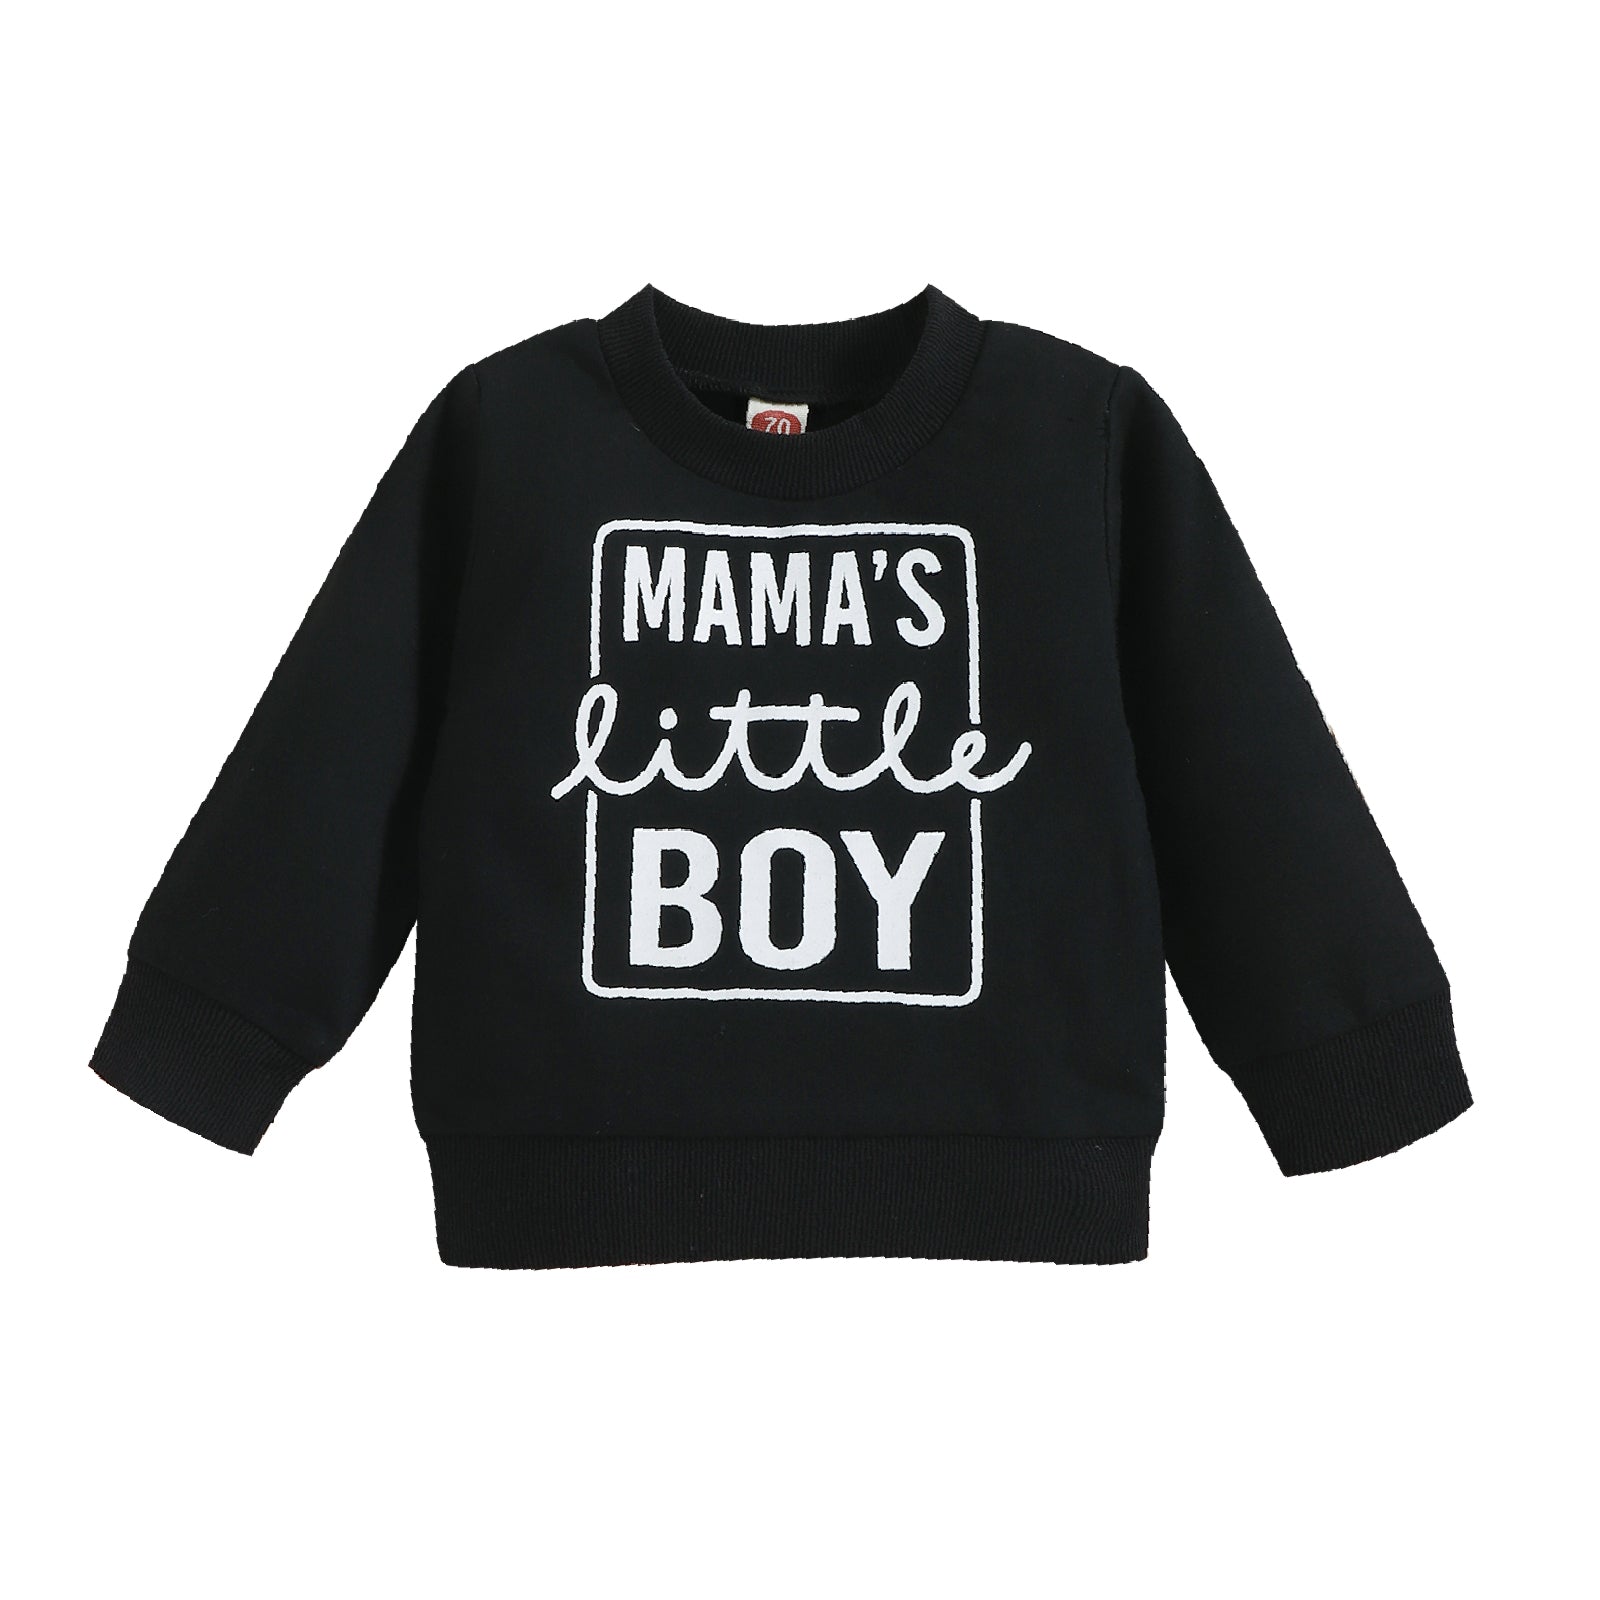 Baby Boy Letter Top.